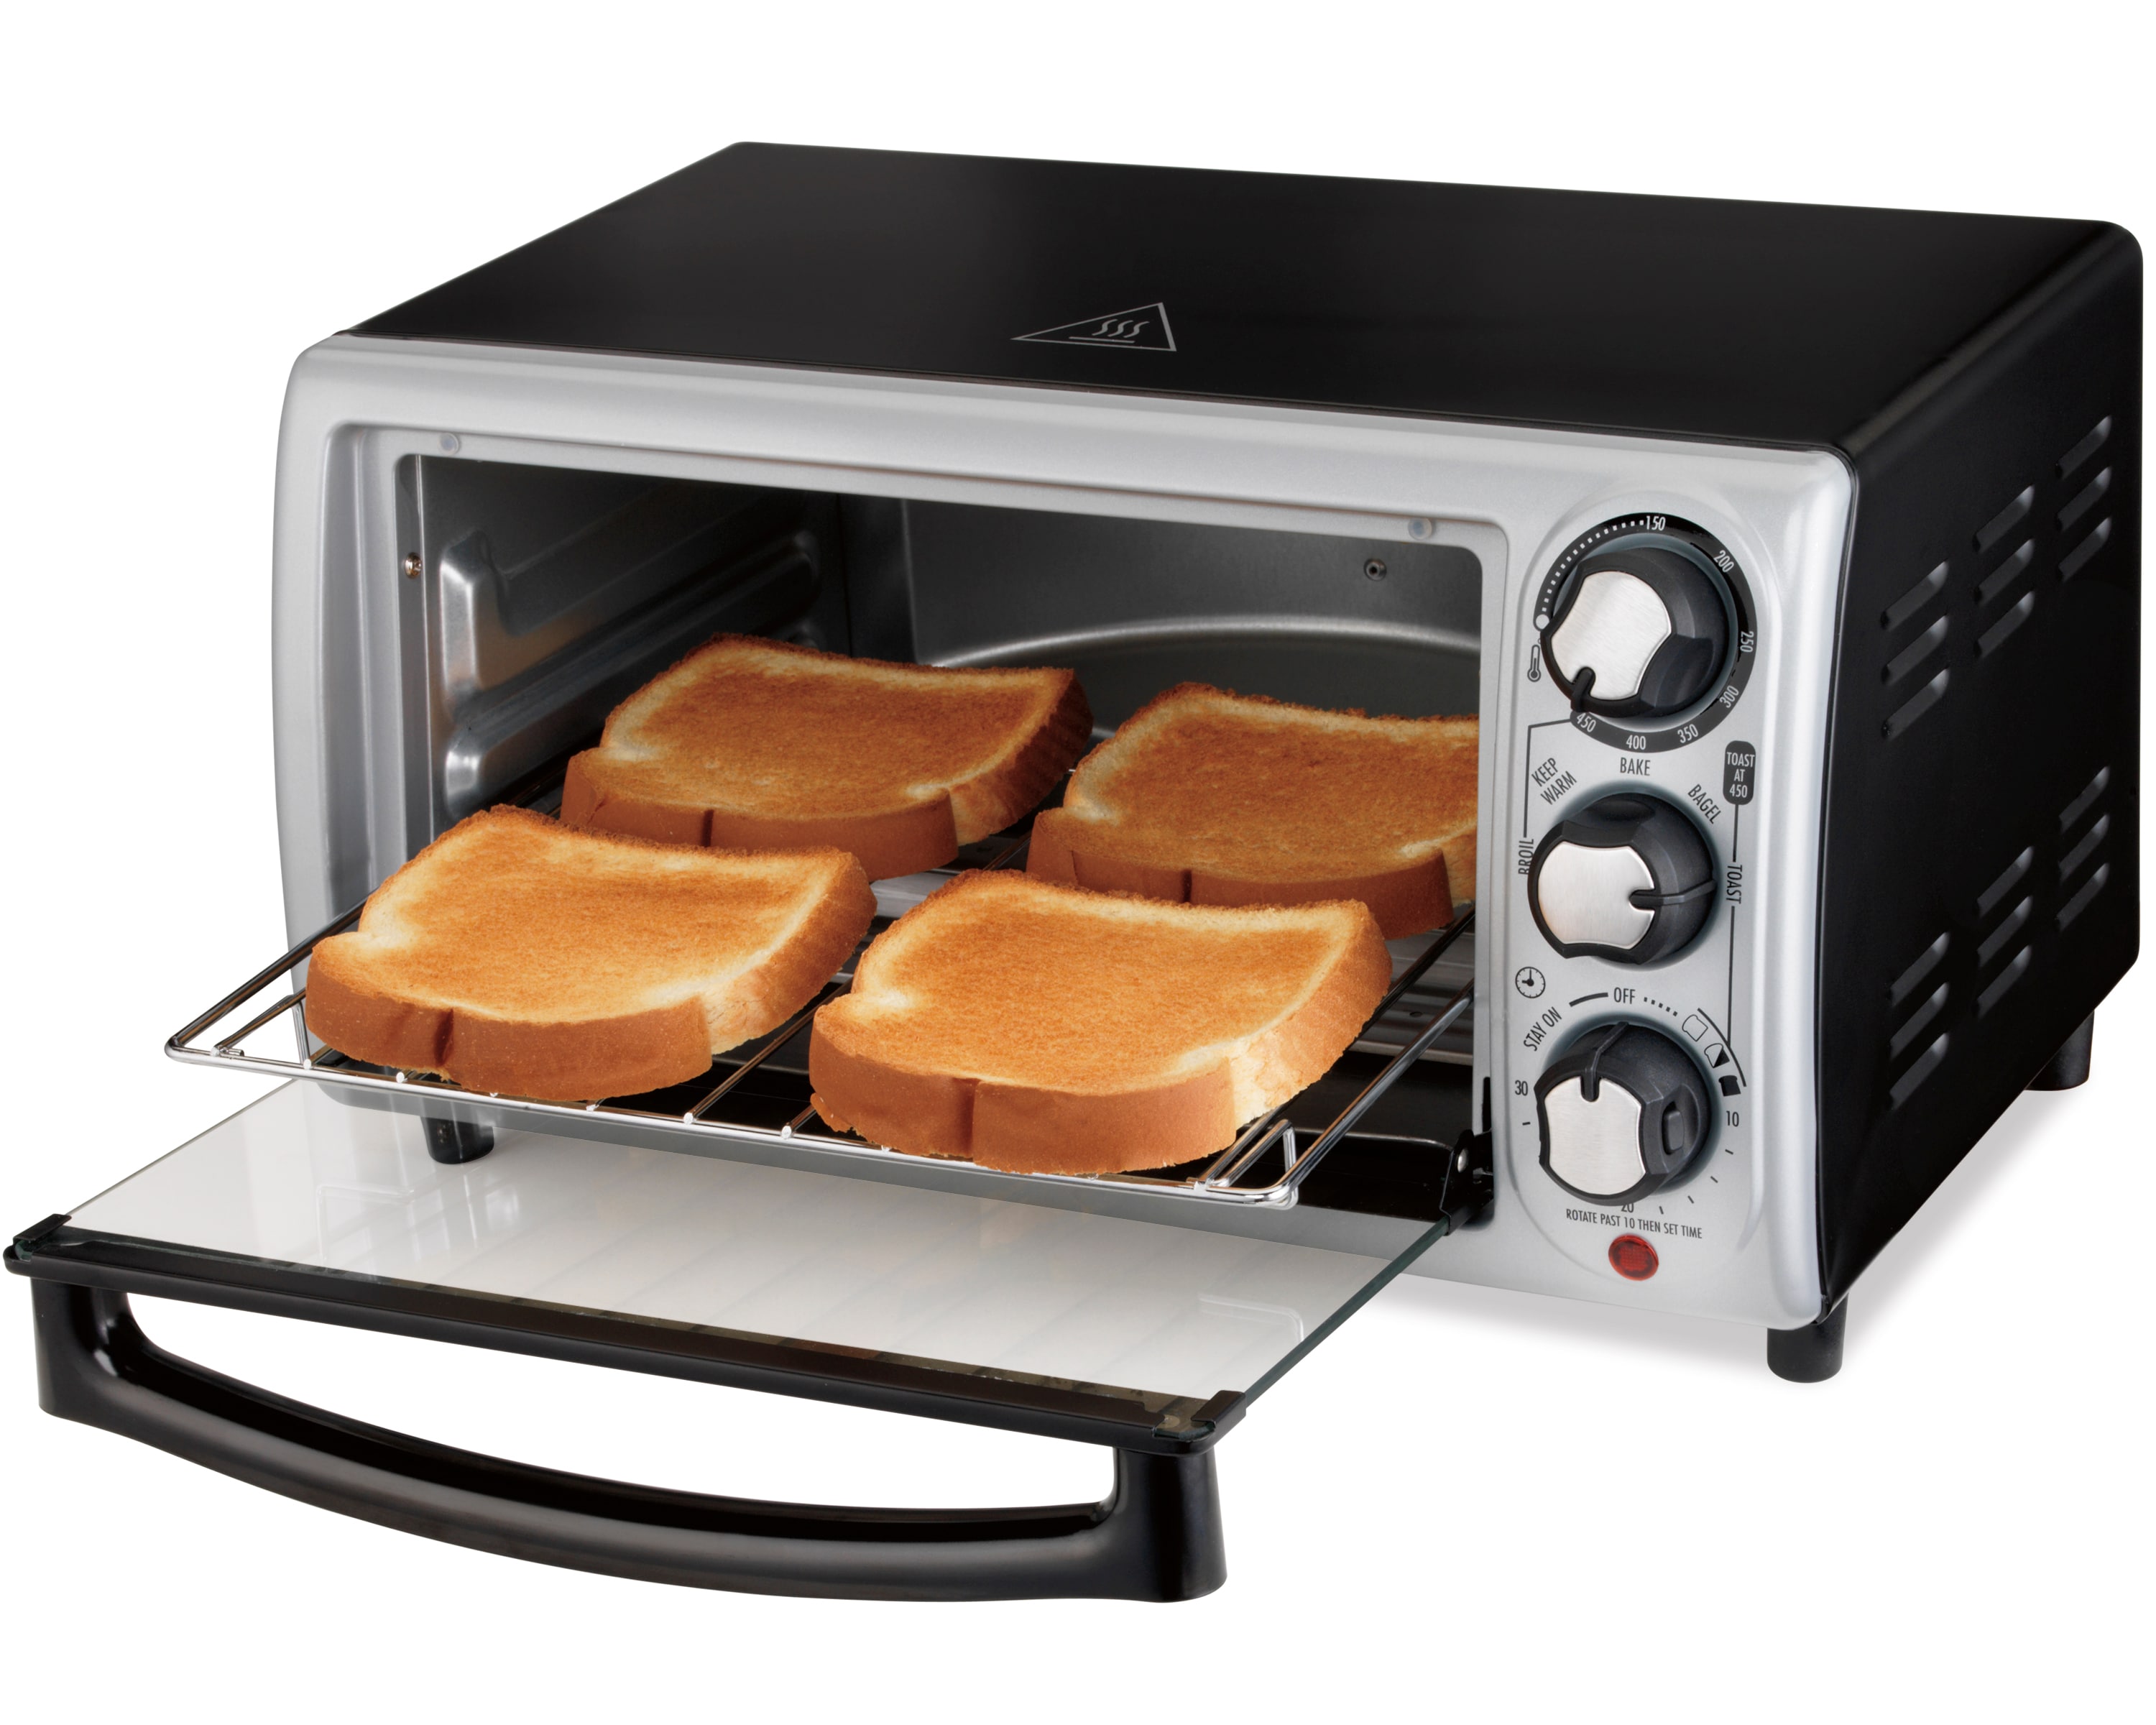 Toaster Ovens for sale in Savannah, Cayman Islands